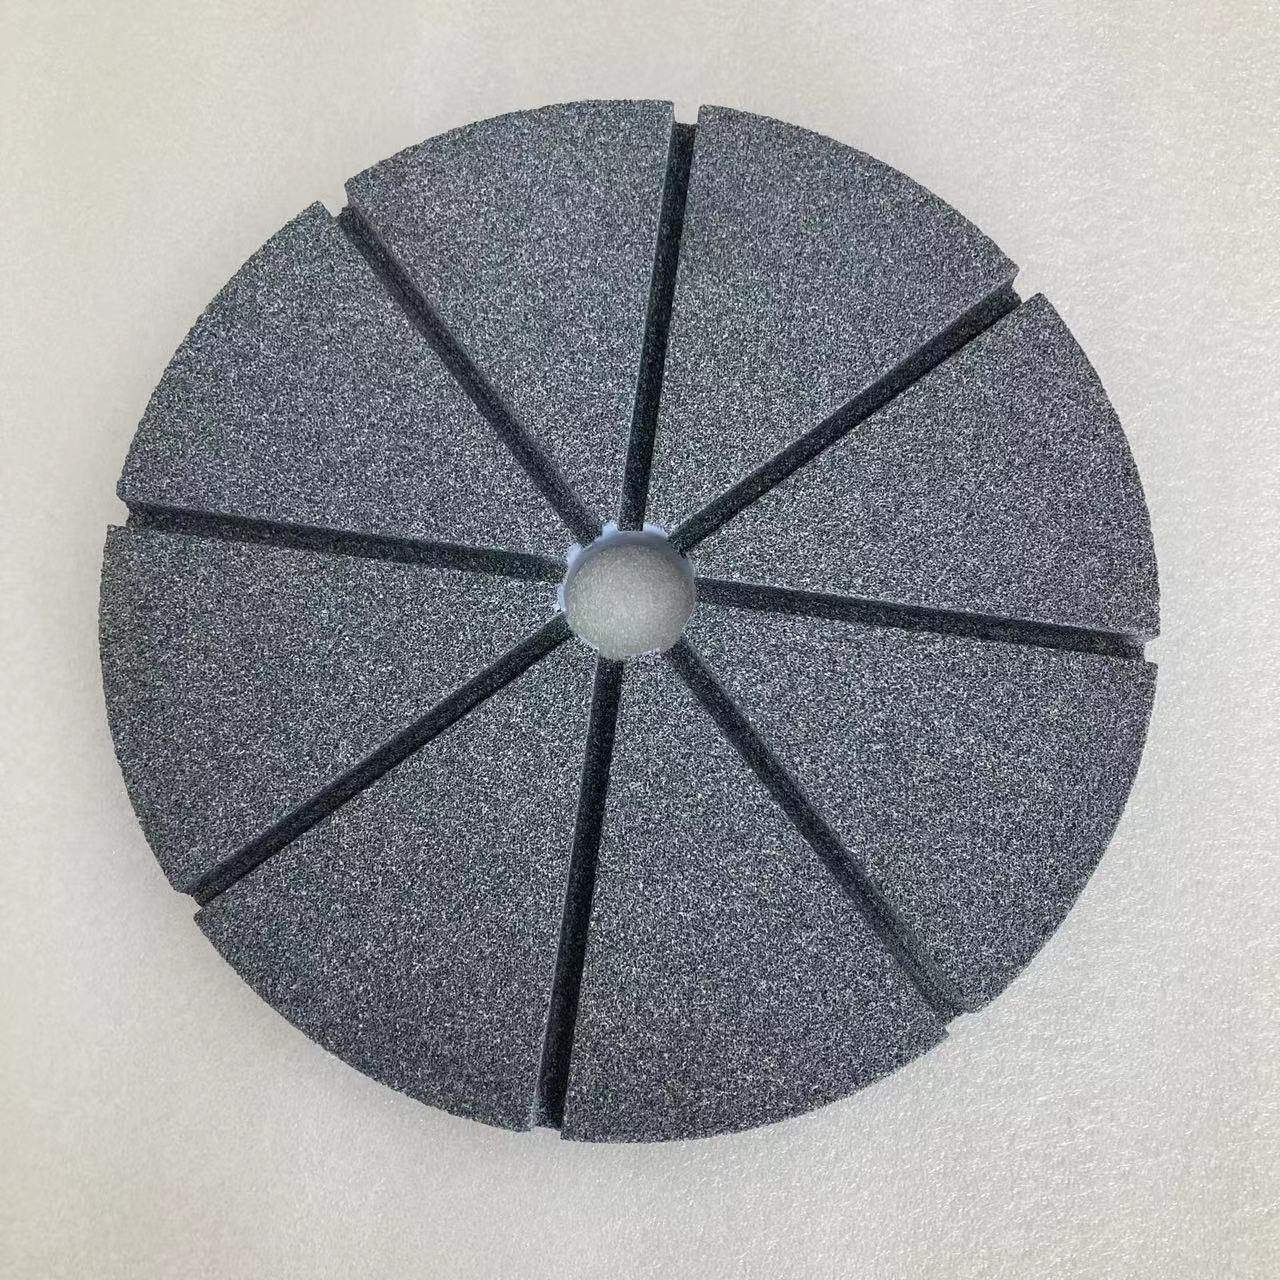 Aluminum Oxide Grinding Wheel with Slots Featured Image